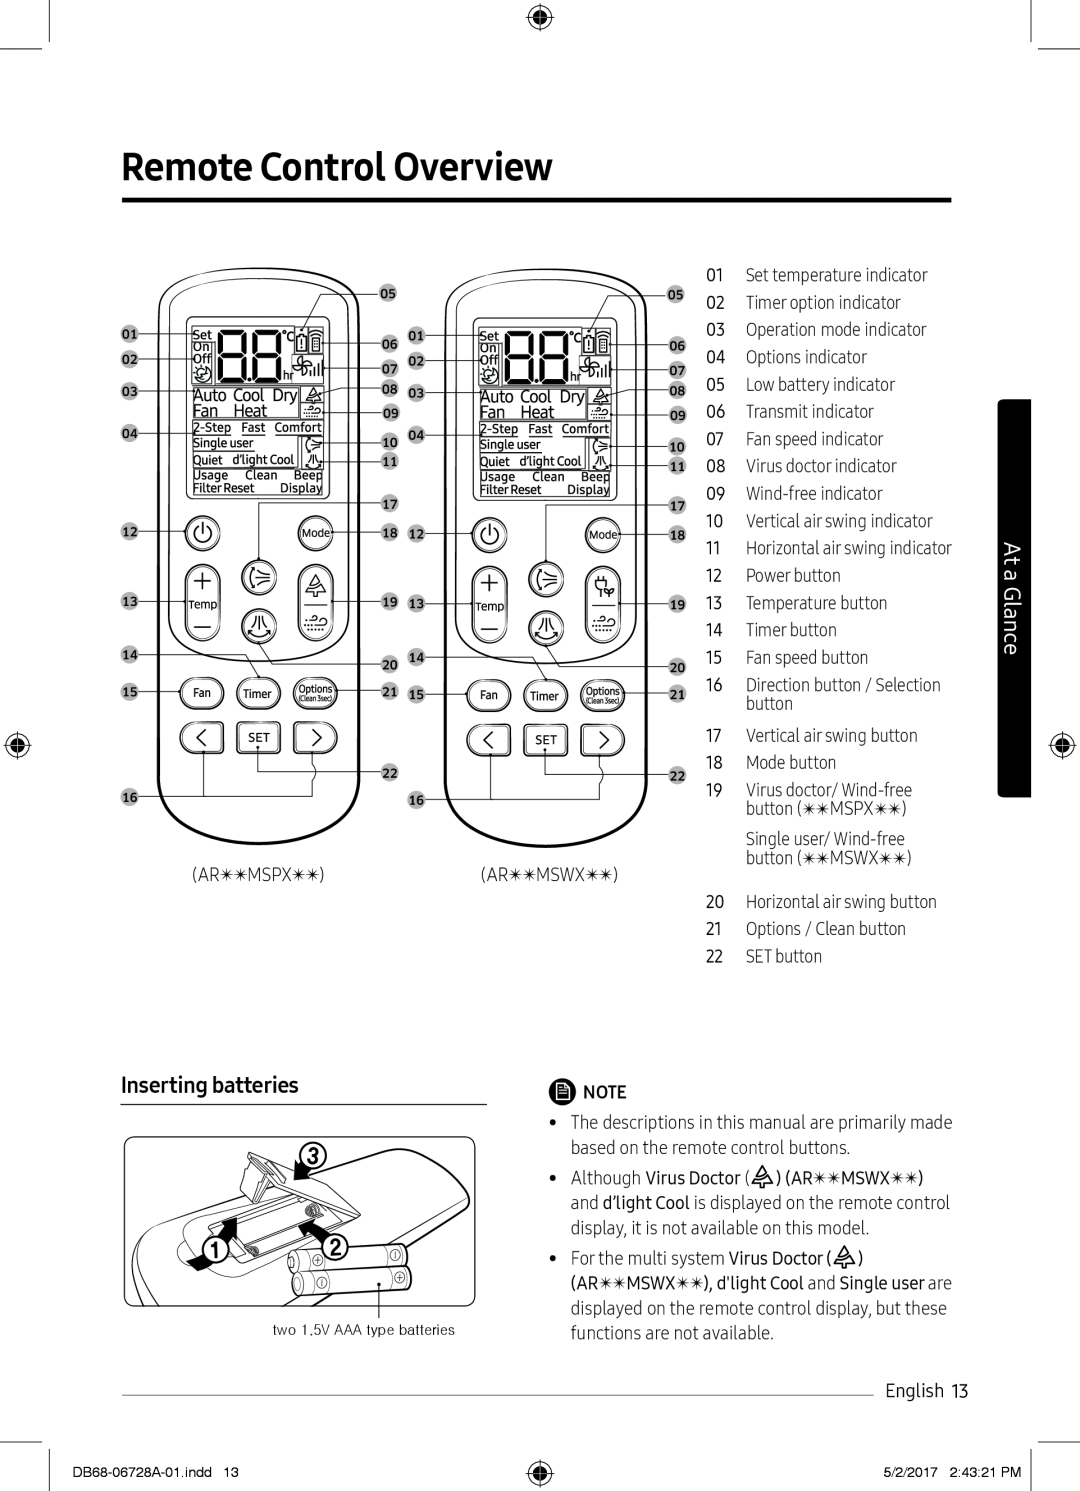 Samsung AR09MSPXASIXEU, AR12MSPXASINEU, AR09MSPXASINEU manual Remote Control Overview, Inserting batteries, At a, Glance 